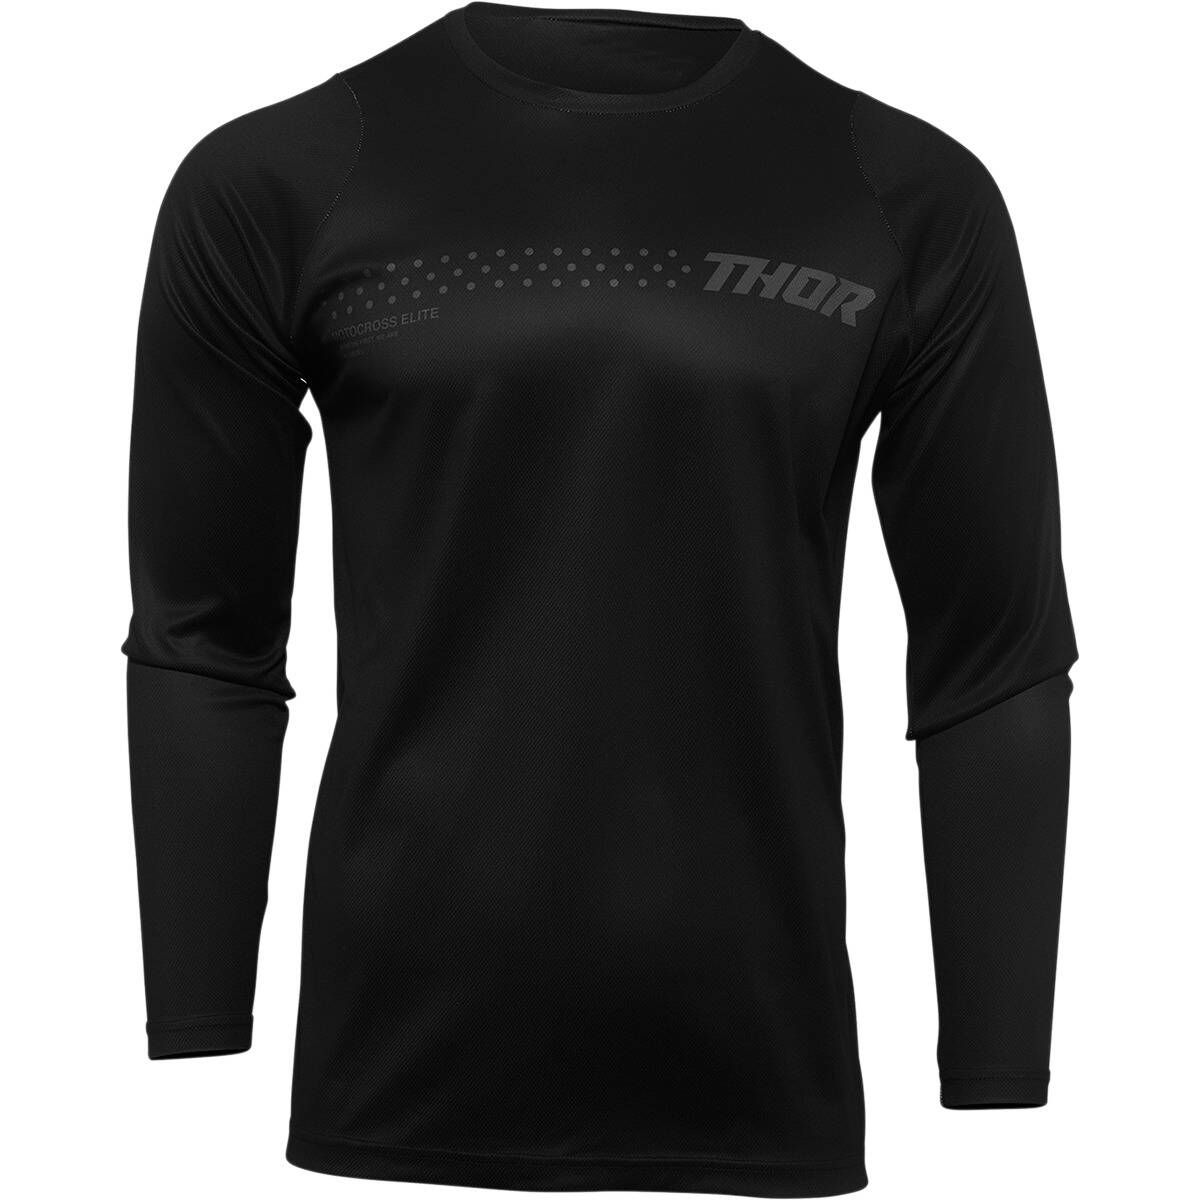 Thor Youth Sector Jersey